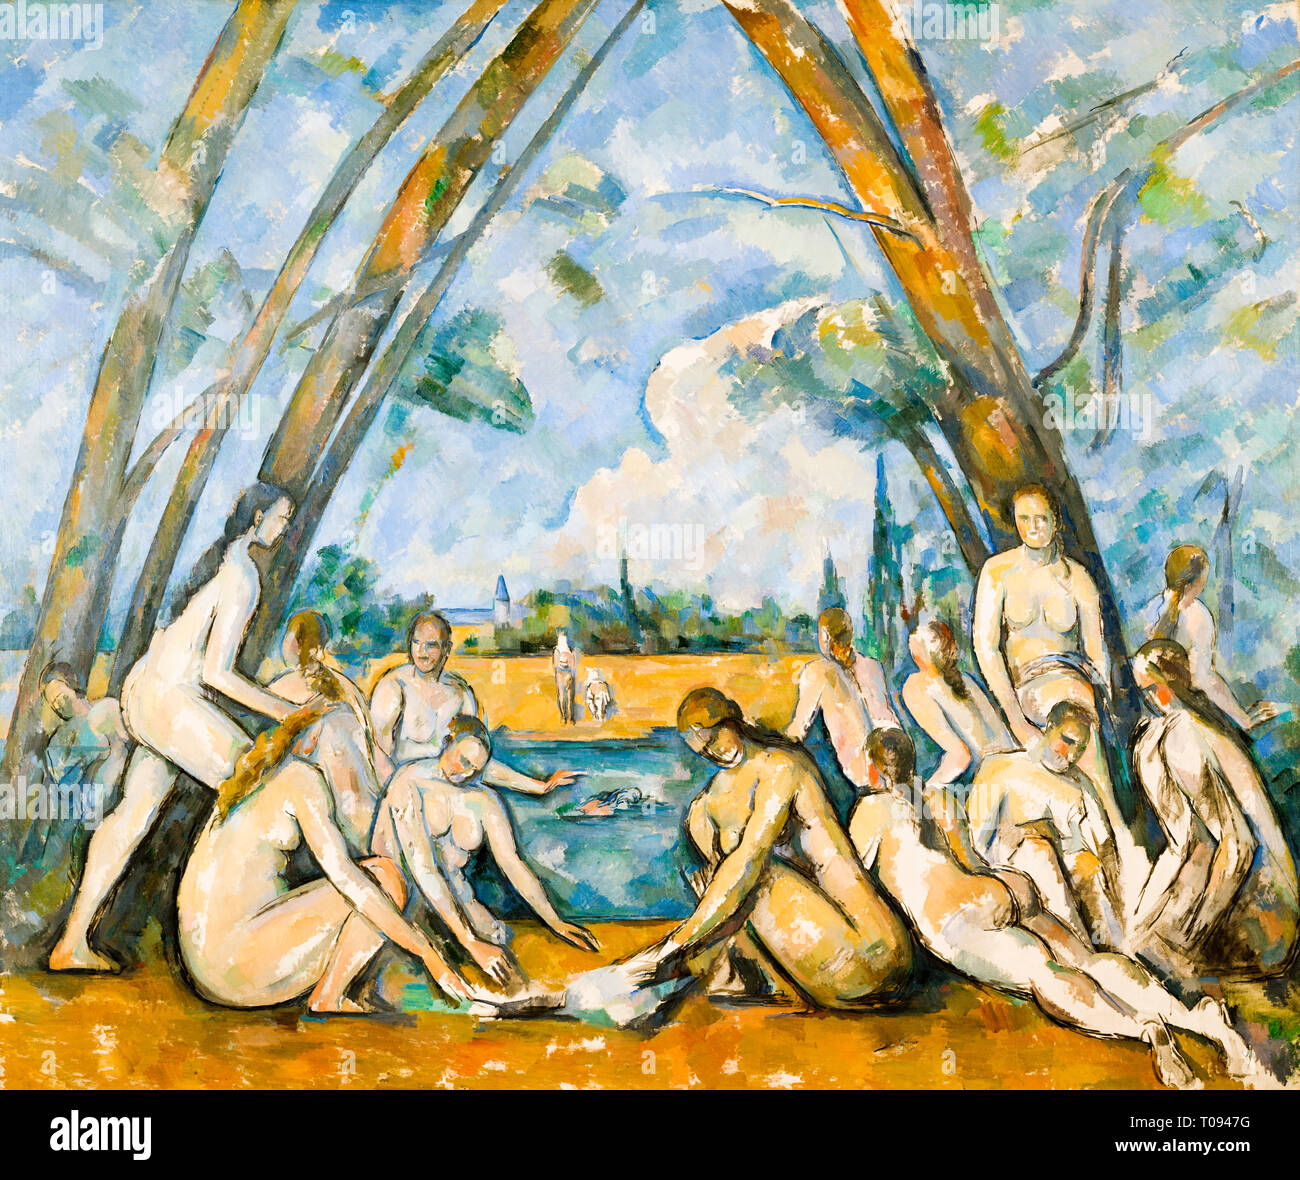 Paul Cézanne, The Large Bathers, Post-Impressionist painting, 1906 Stock Photo